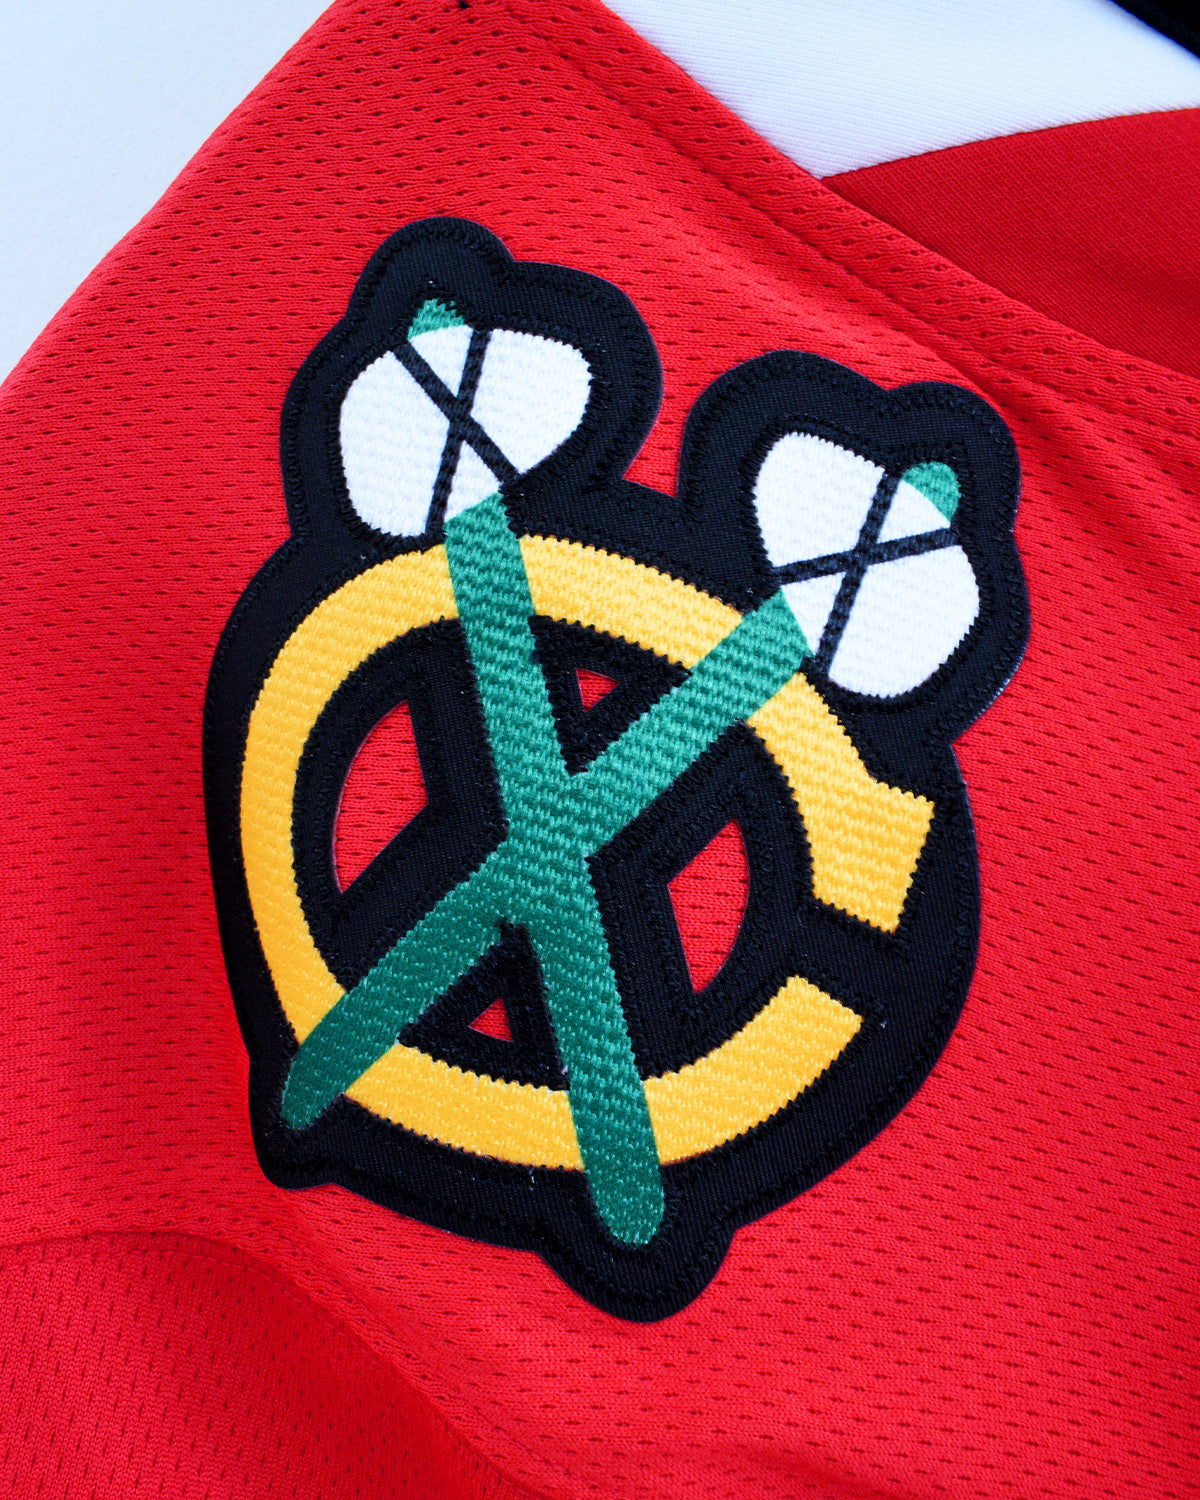 Outerstuff Youth Connor Bedard Red Chicago Blackhawks Home Replica Player Jersey Size: Small/Medium